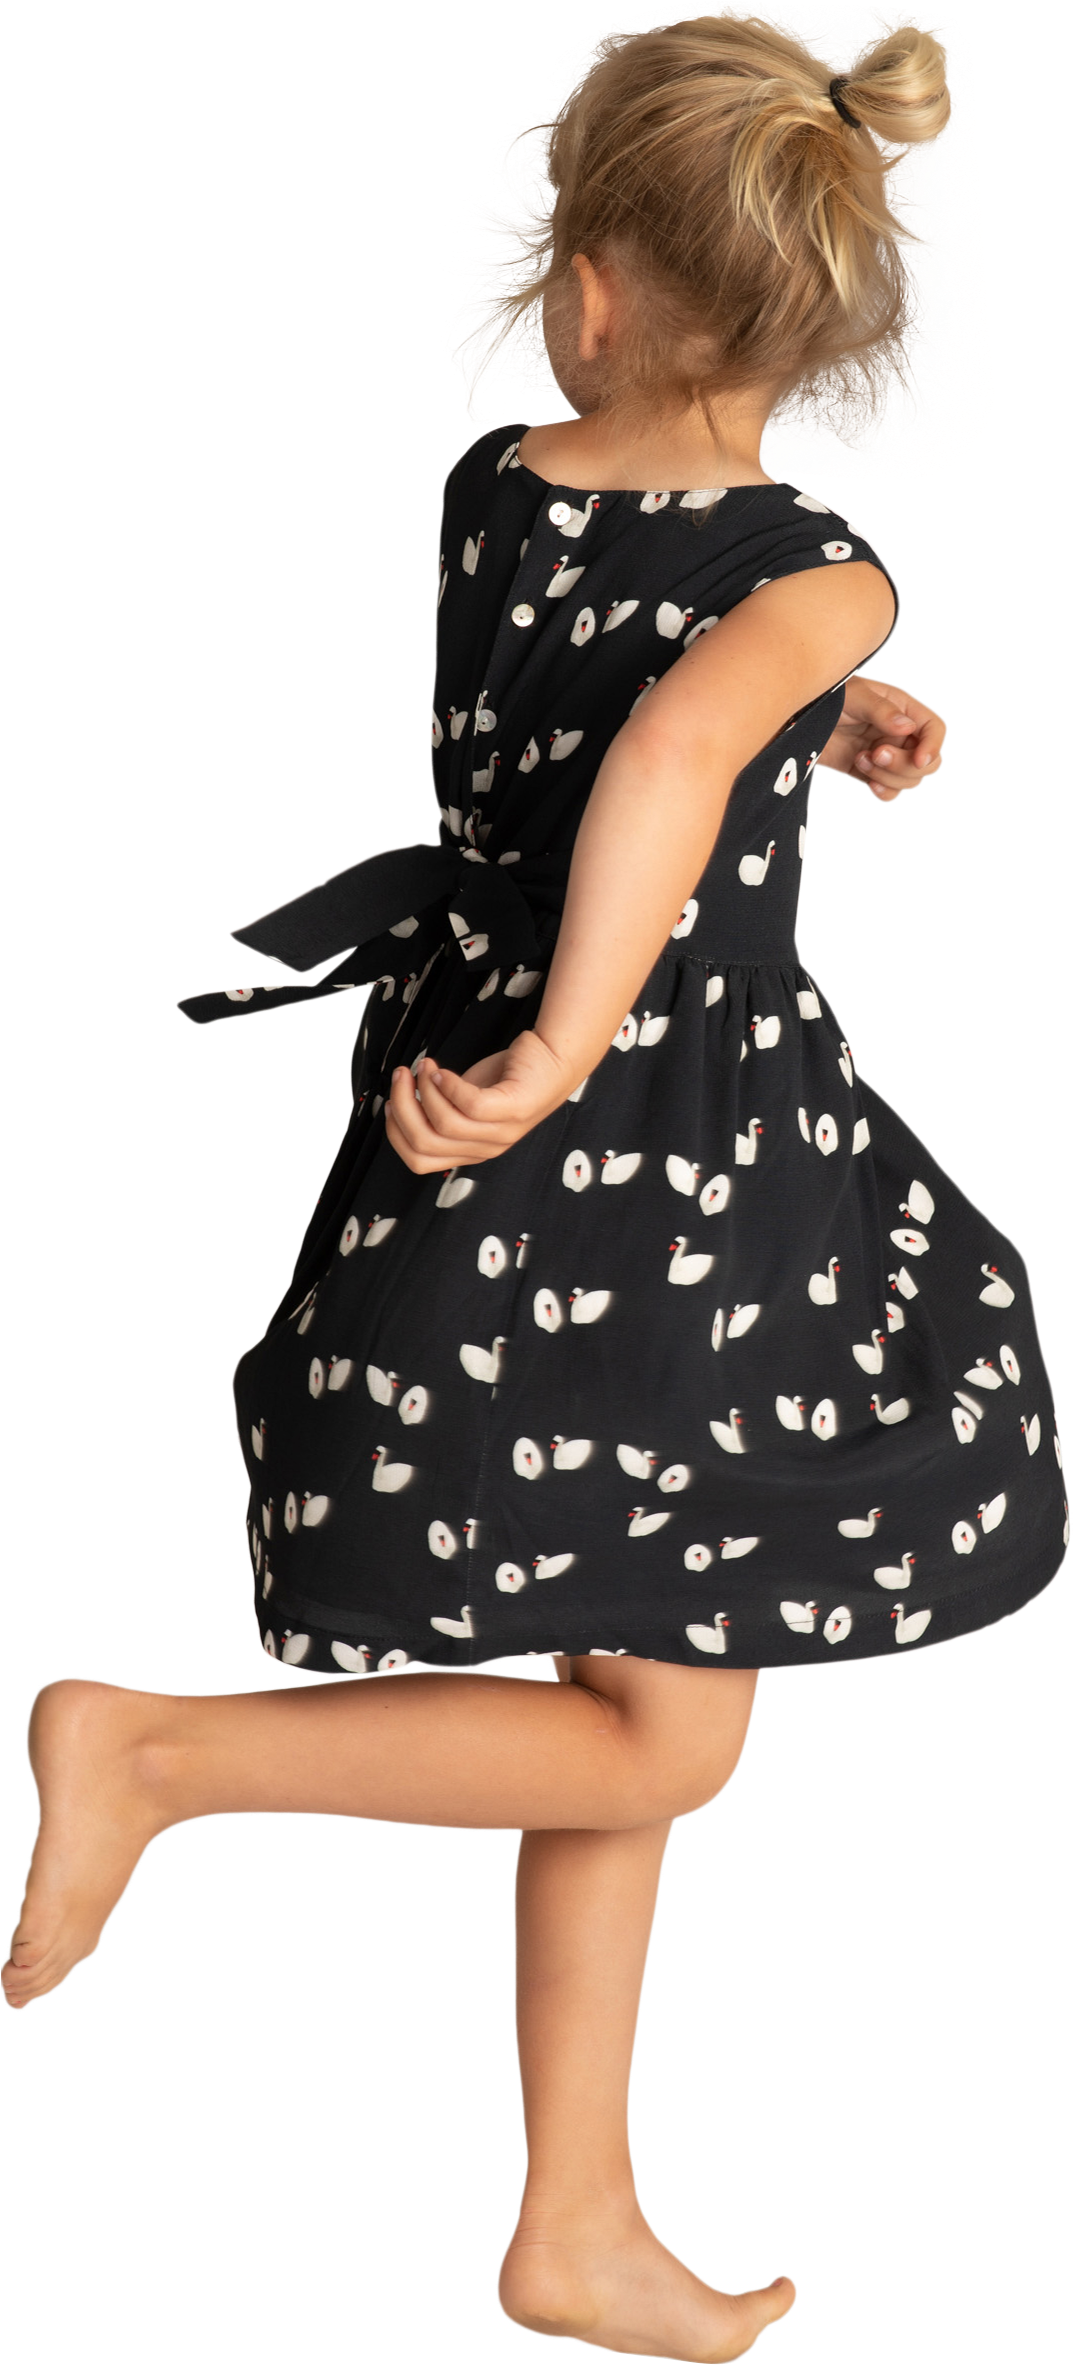 Petite fille robe PNG Image